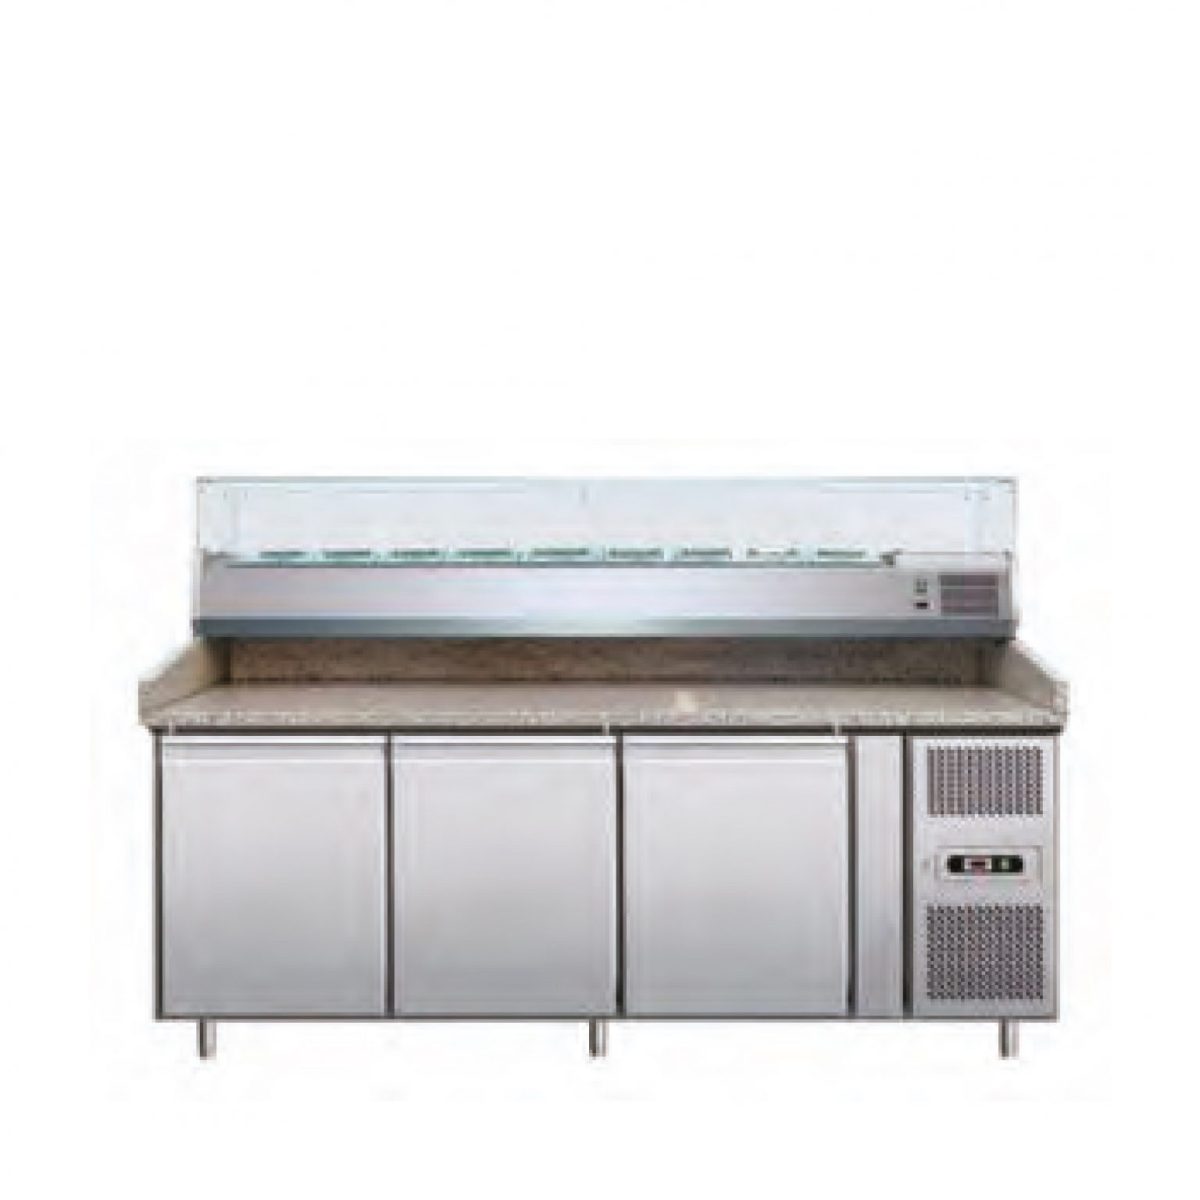 MEUBLE A PIZZA 3 PORTES INOX 60-40 – CUISIFRIOT